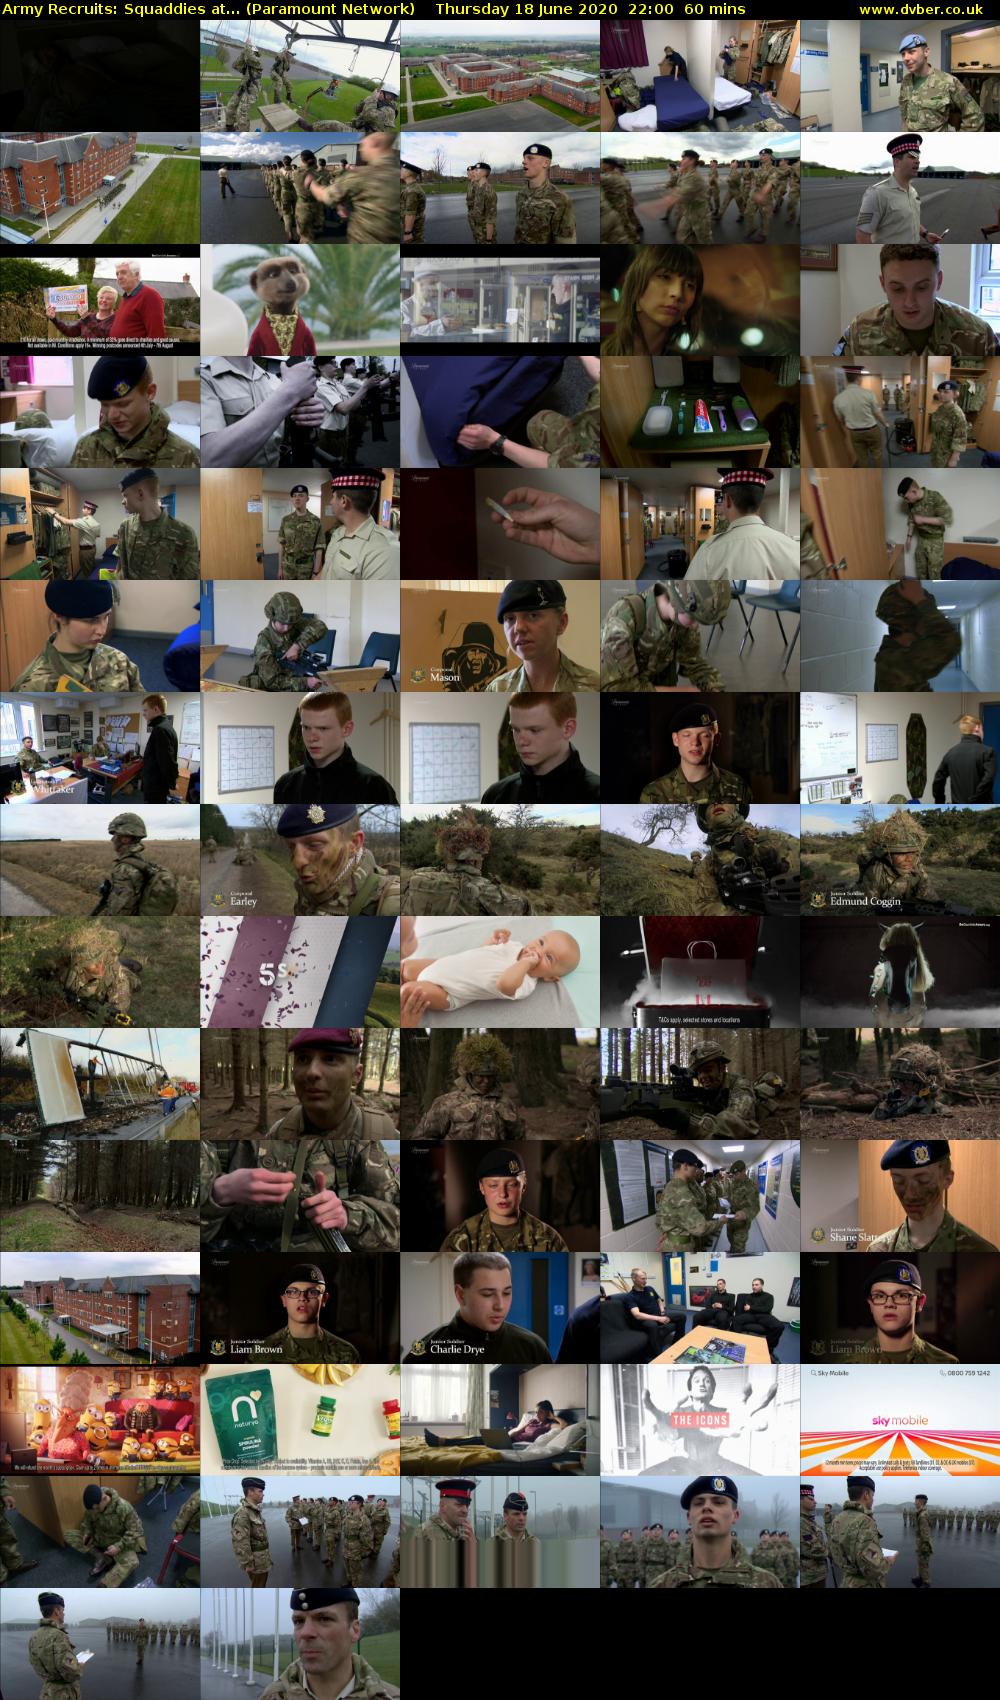 Army Recruits: Squaddies at... (Paramount Network) Thursday 18 June 2020 22:00 - 23:00